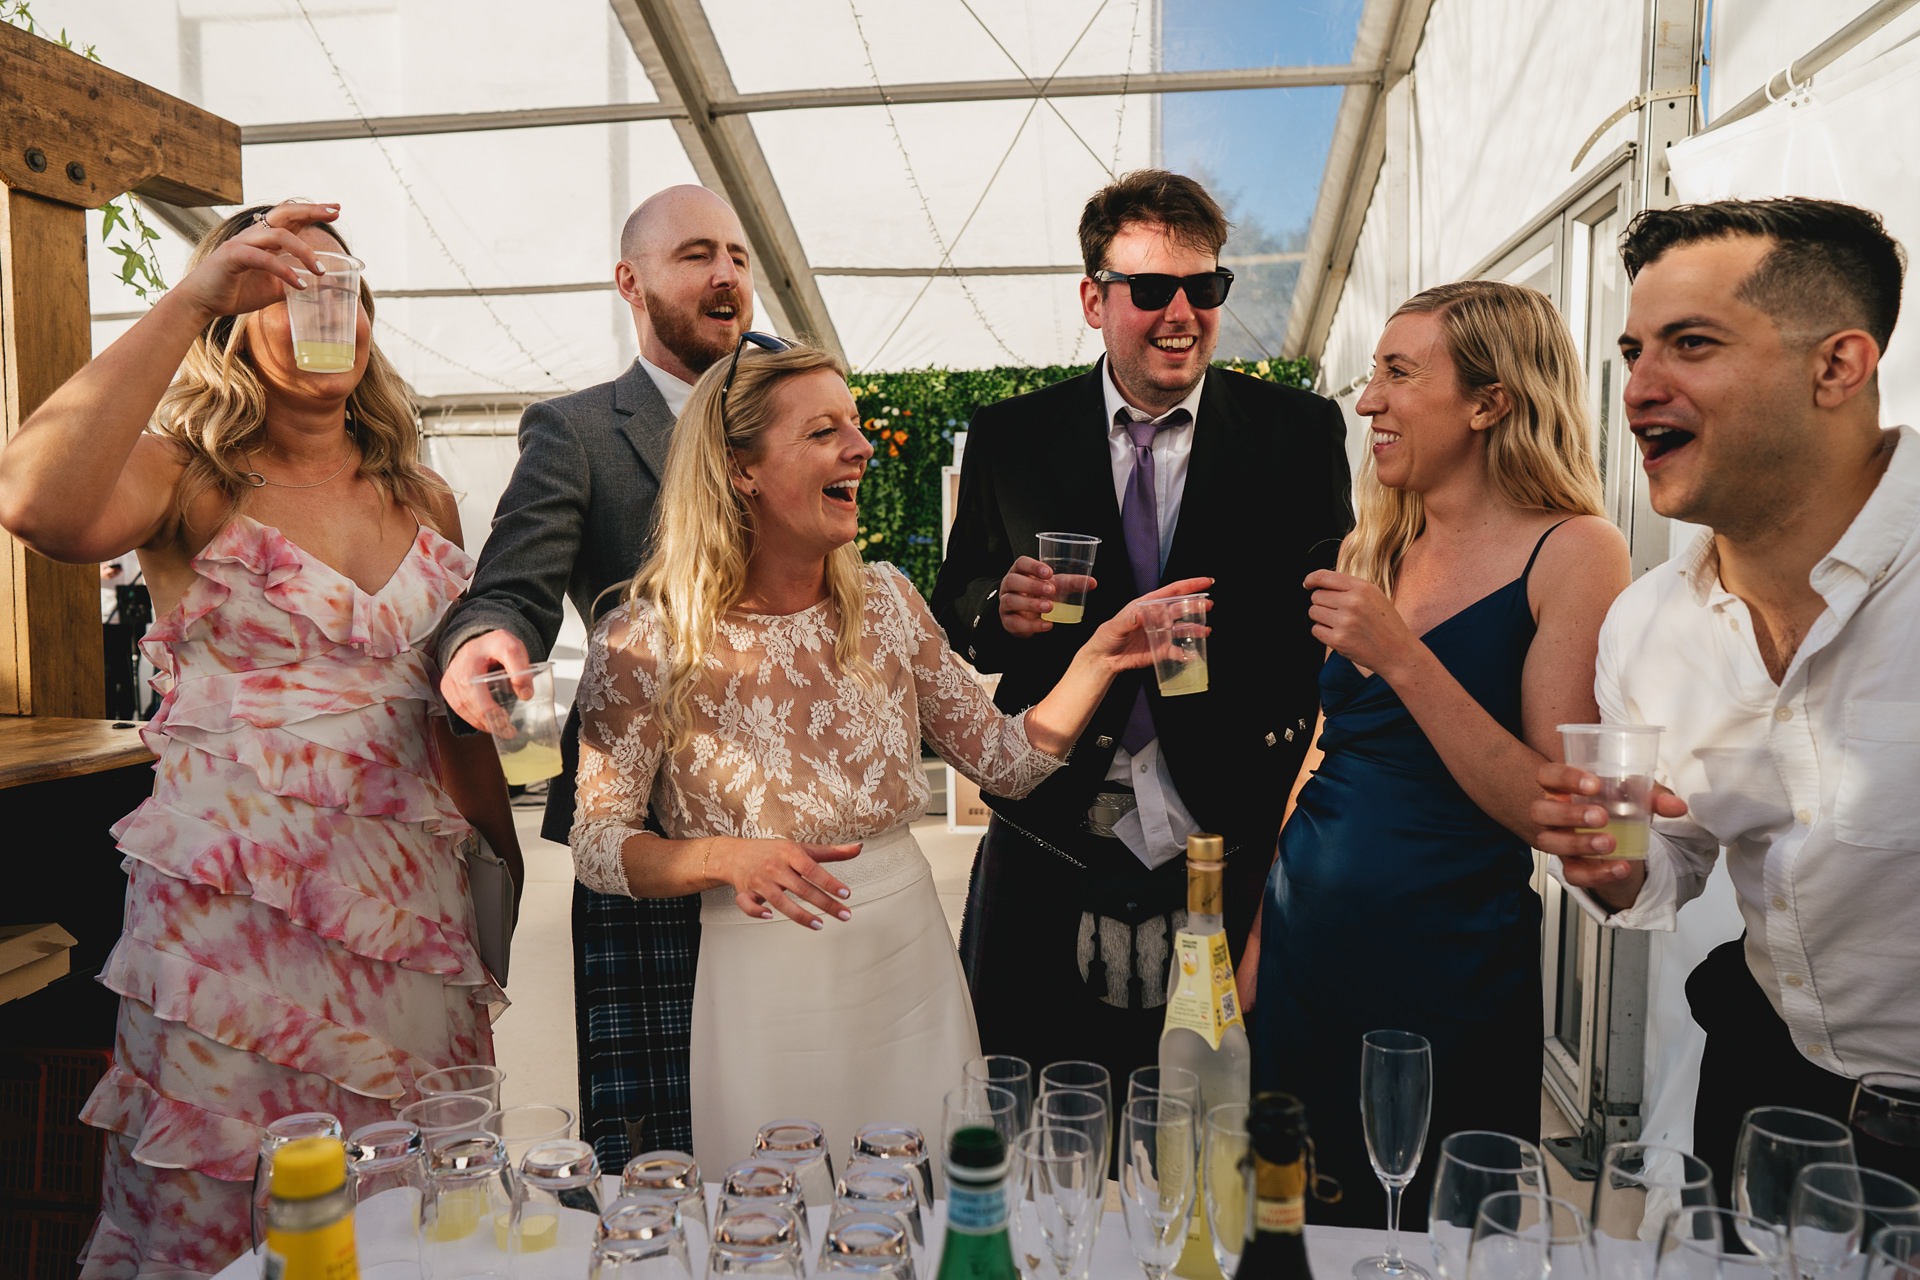 A group of wedding guests laughing together and preparing to drink shots